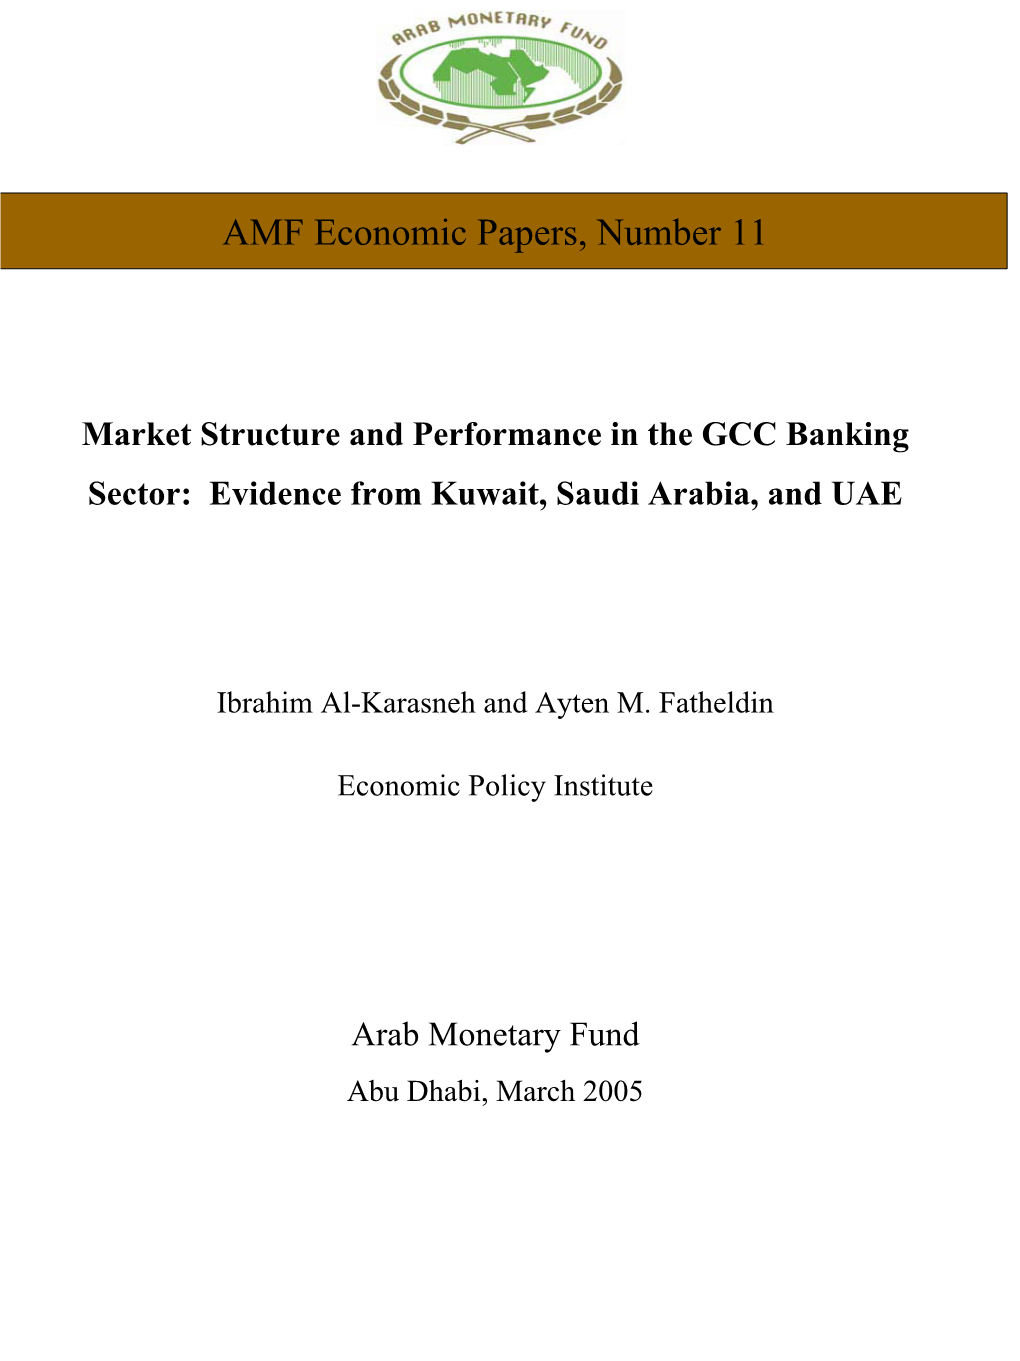 Investment and the Stock Market: Evidence from Arab